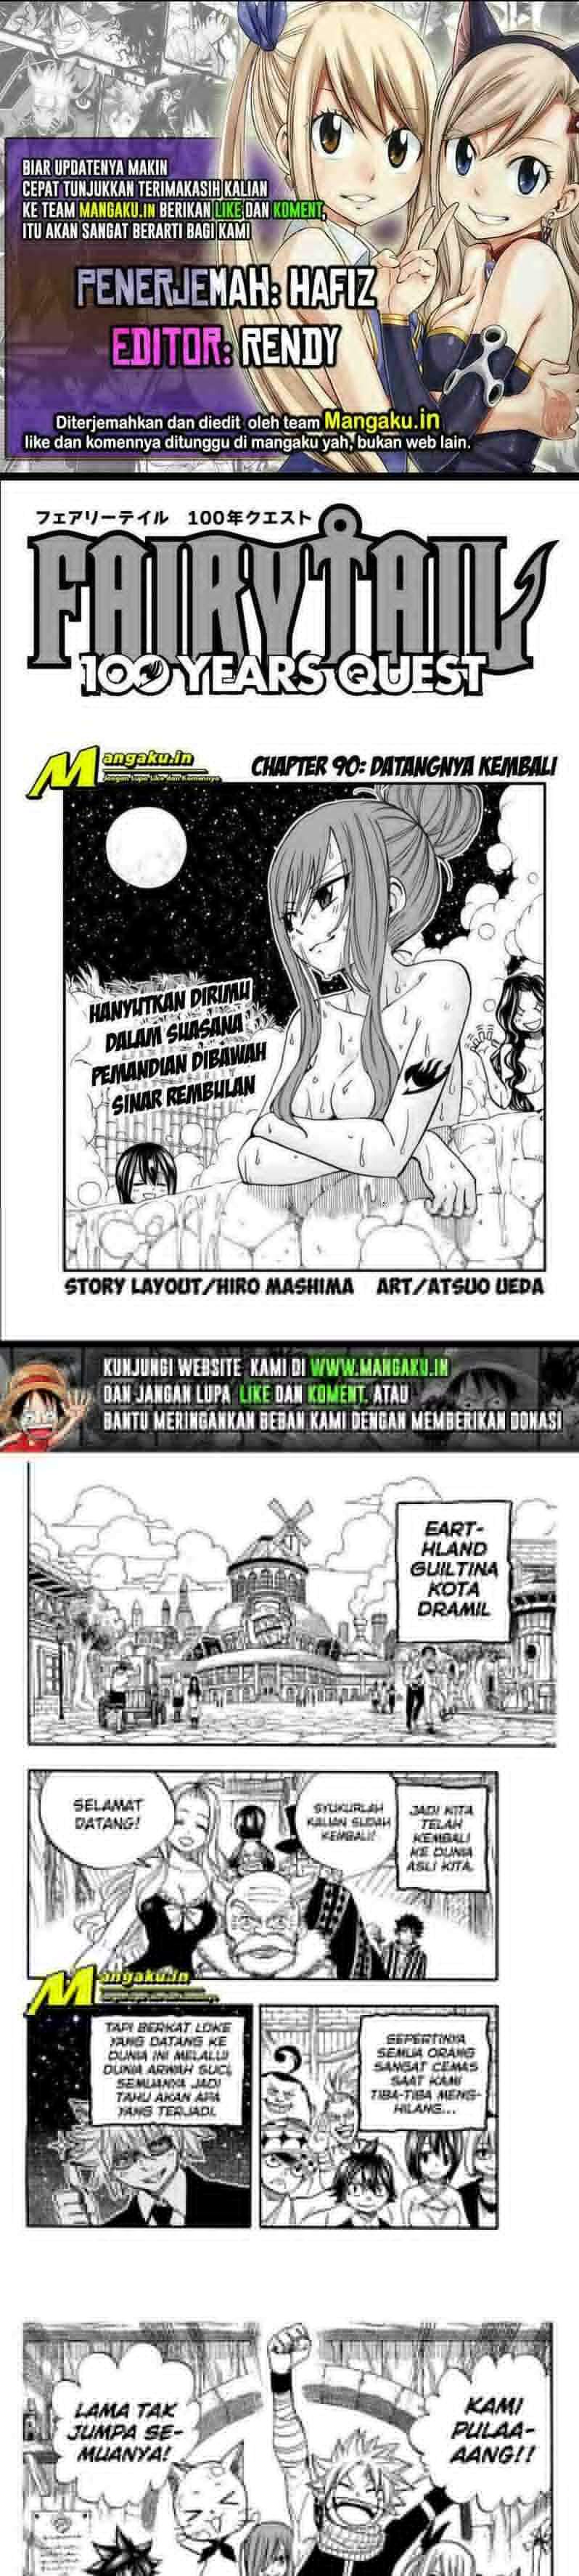 Fairy Tail: 100 Years Quest: Chapter 90 - Page 1